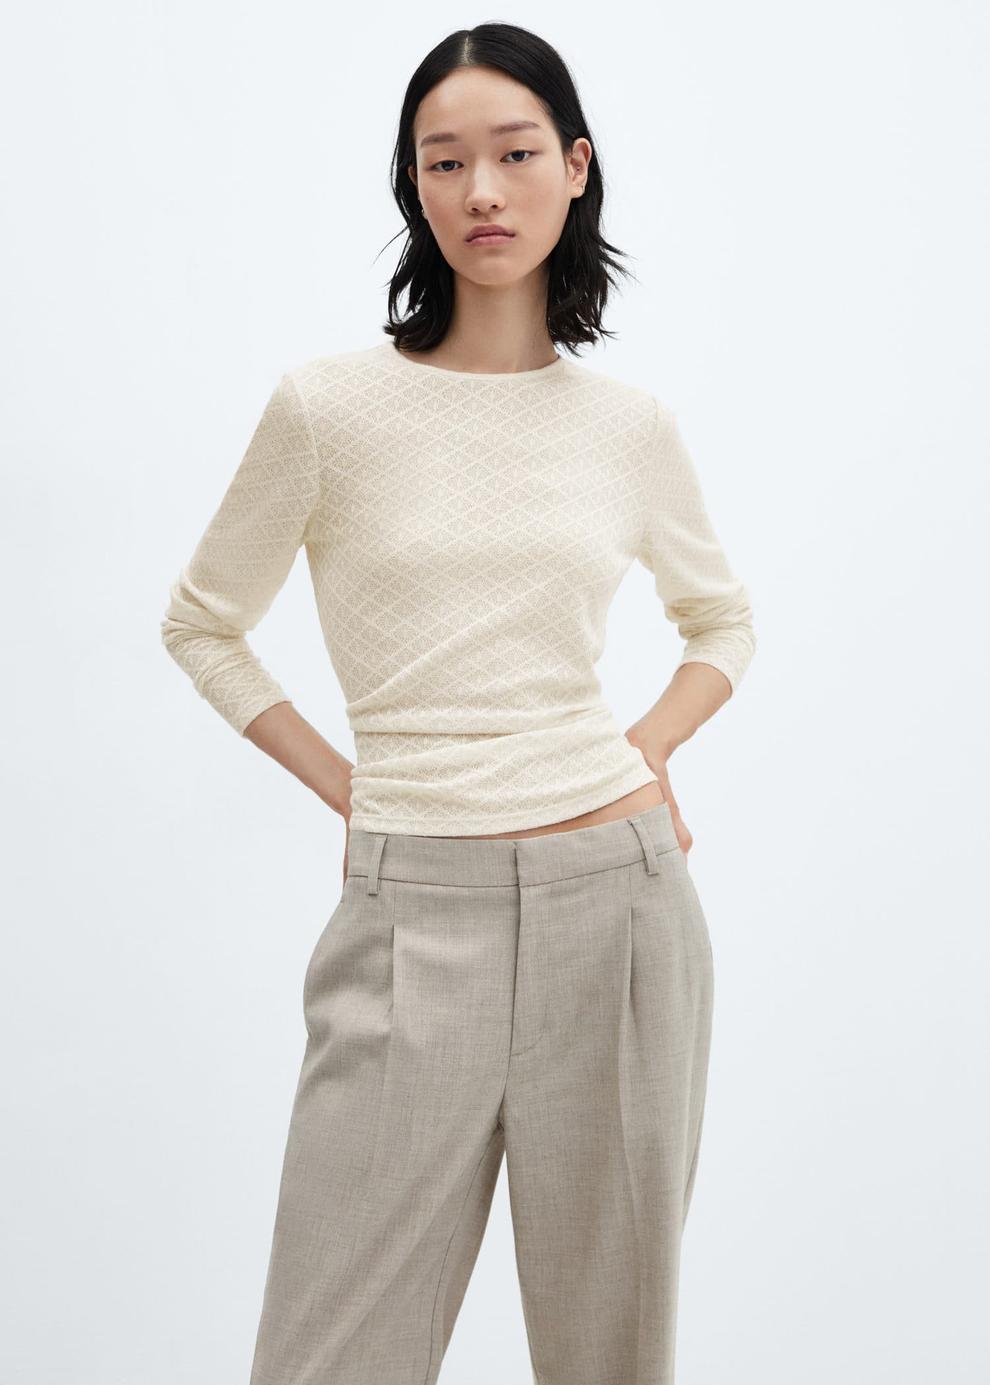 Textured knit t-shirt offers at S$ 19.9 in Mango